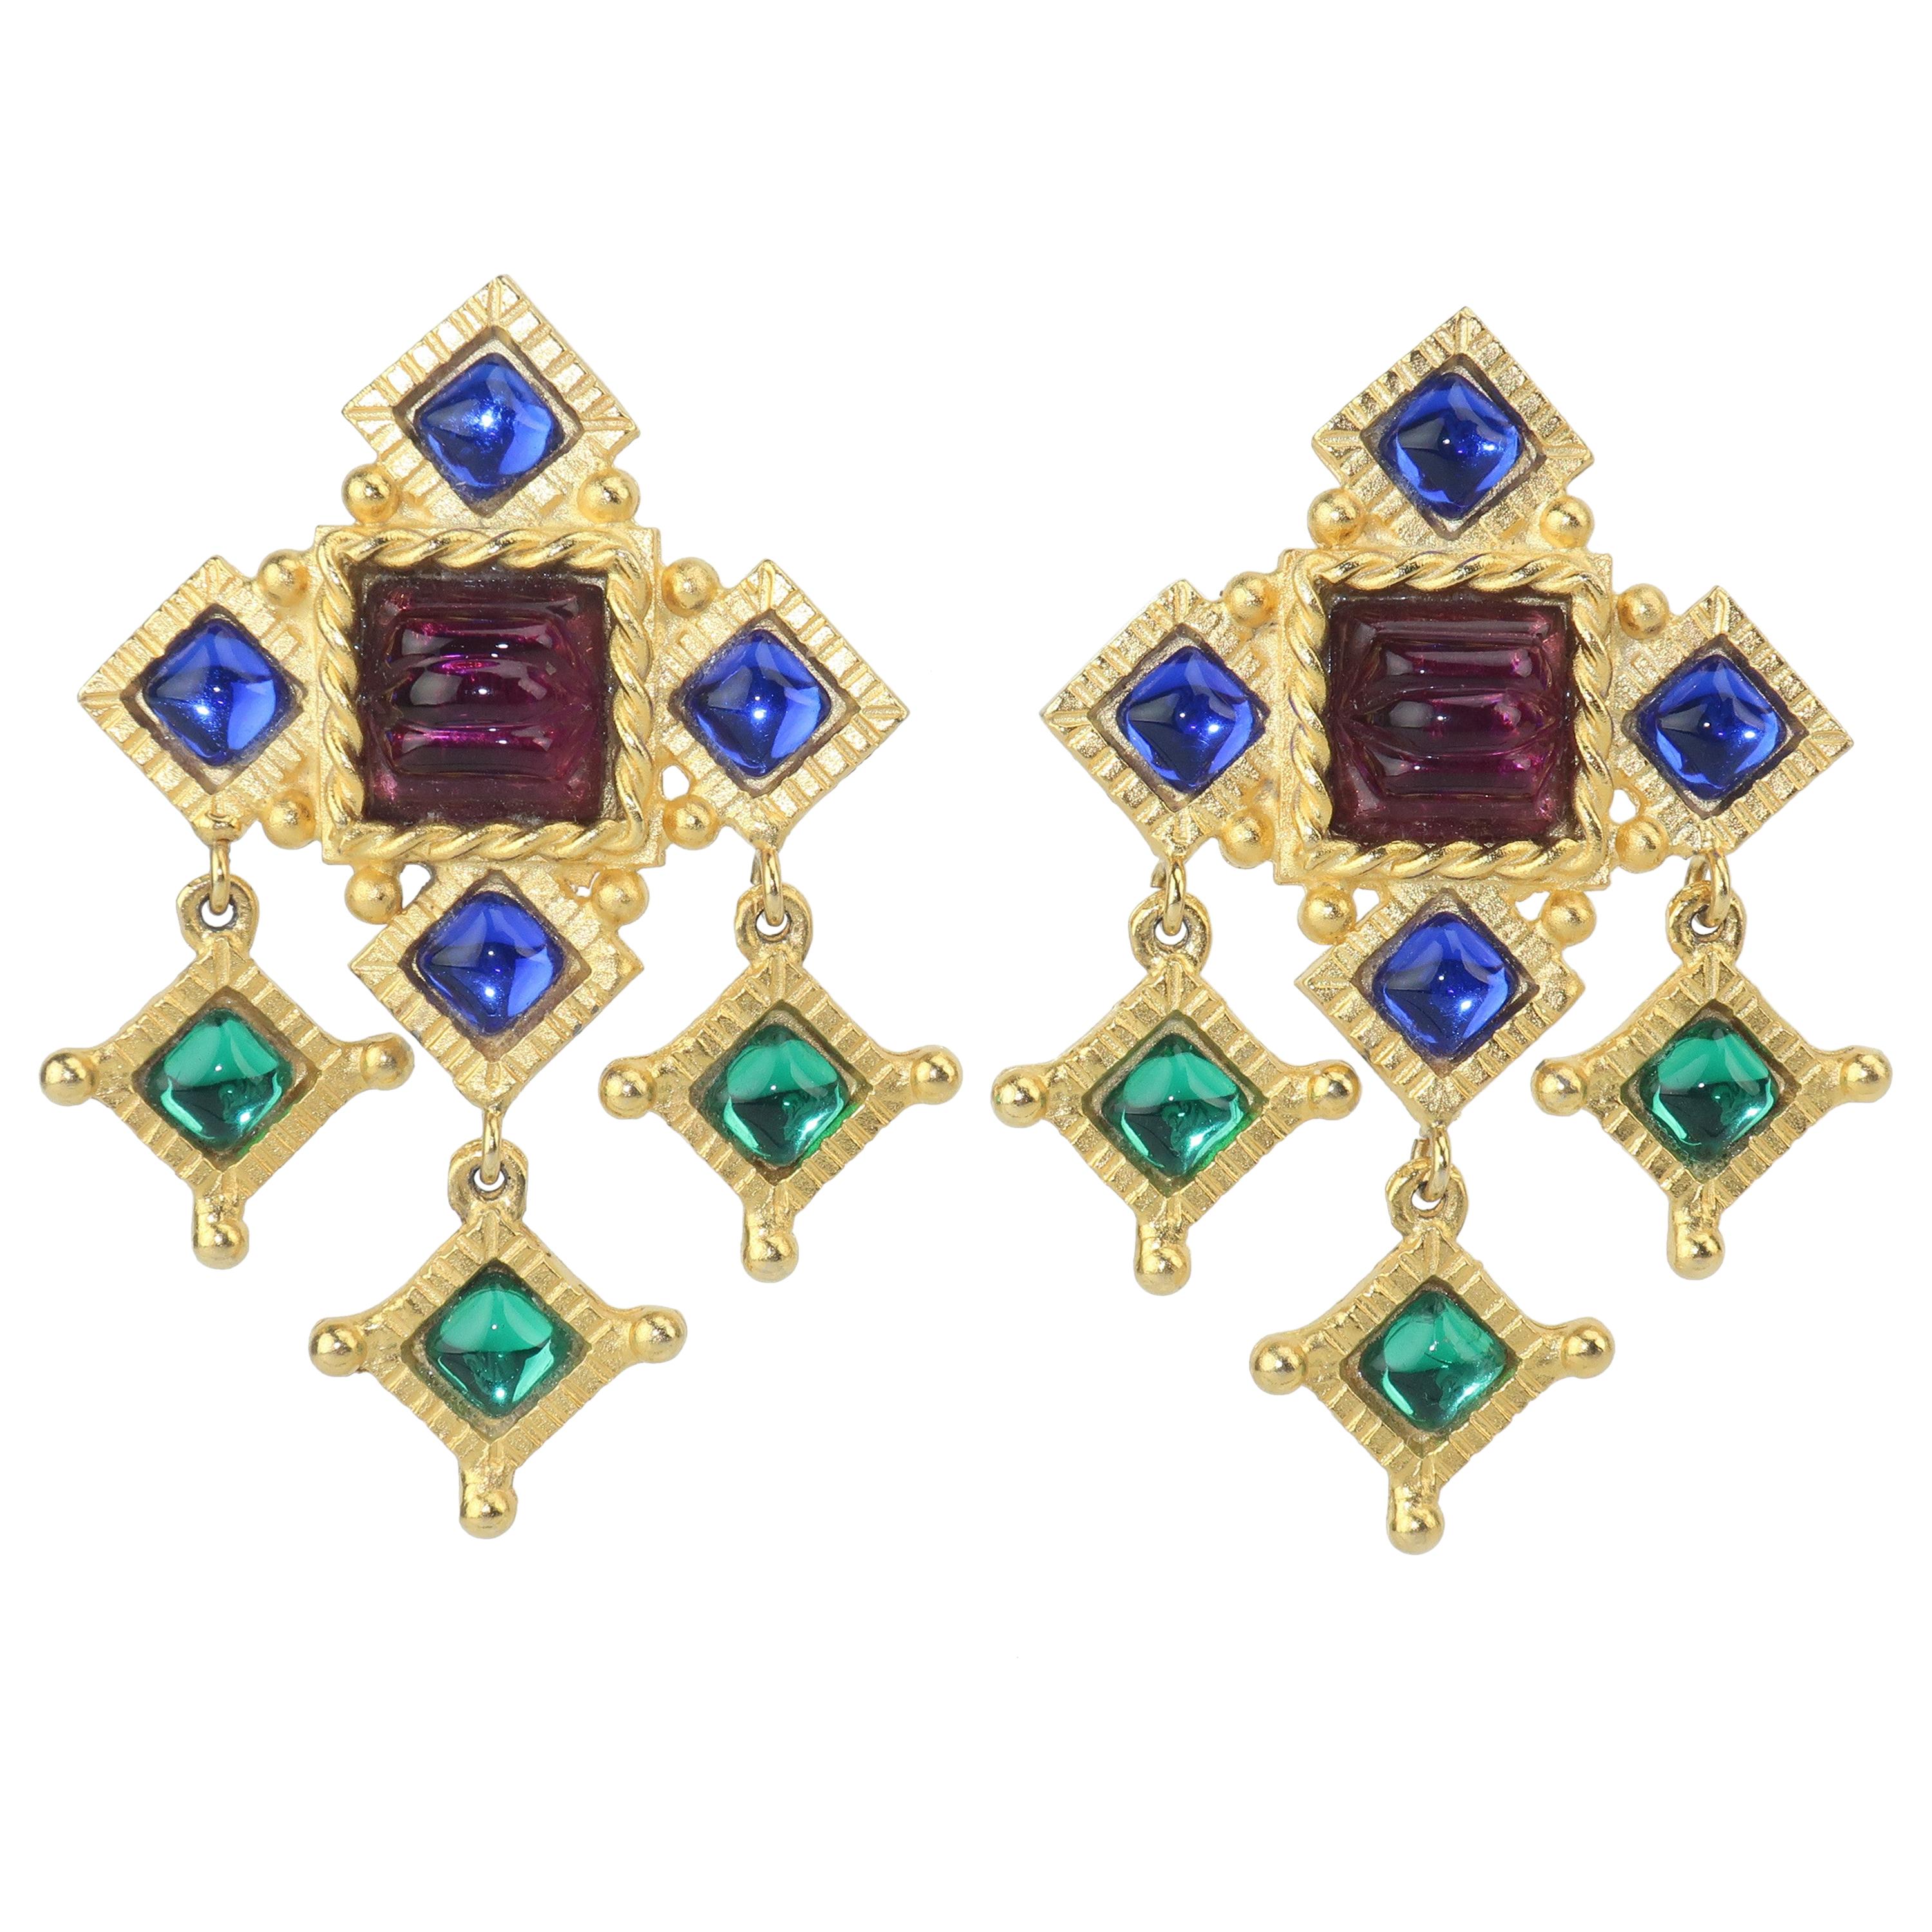 Gerard Yosca Gold Earrings With Cabochon Glass Stones